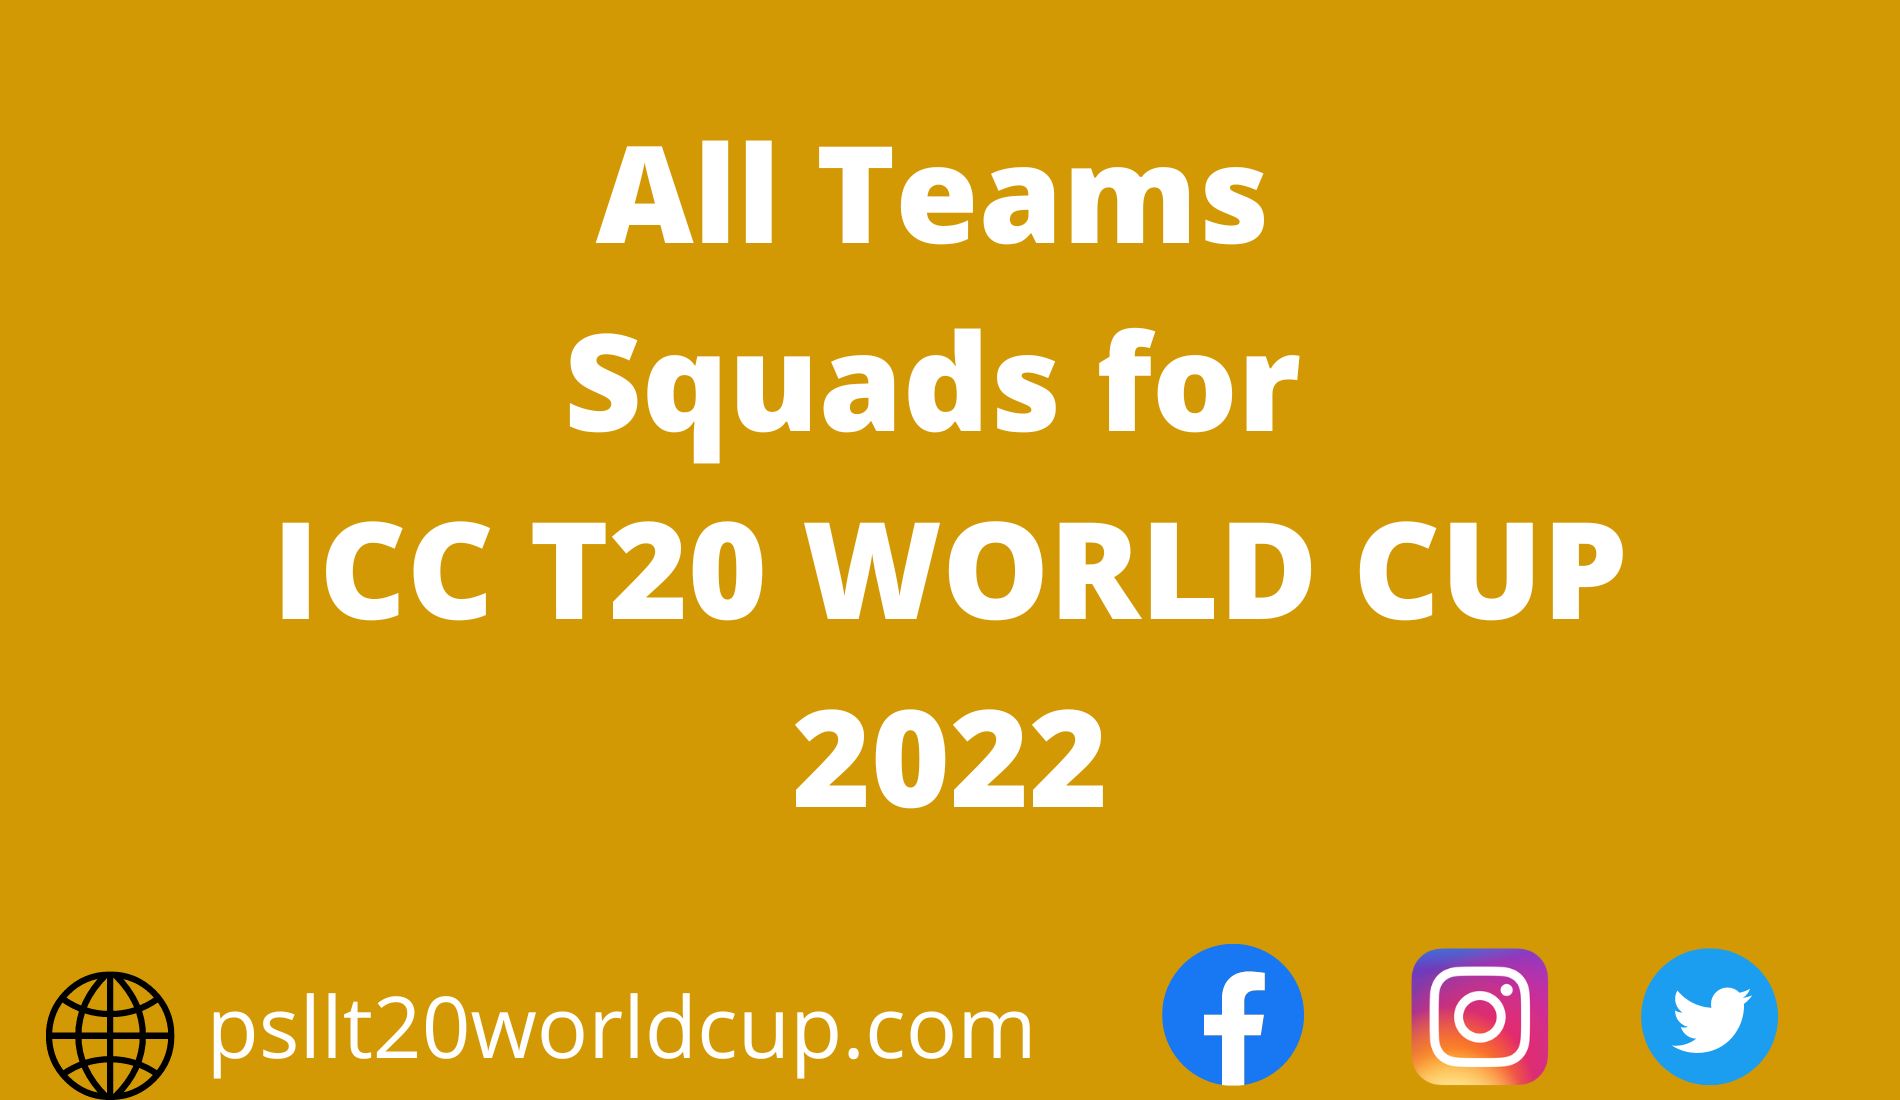 All The Squads For ICC Men's T20 World Cup 2022